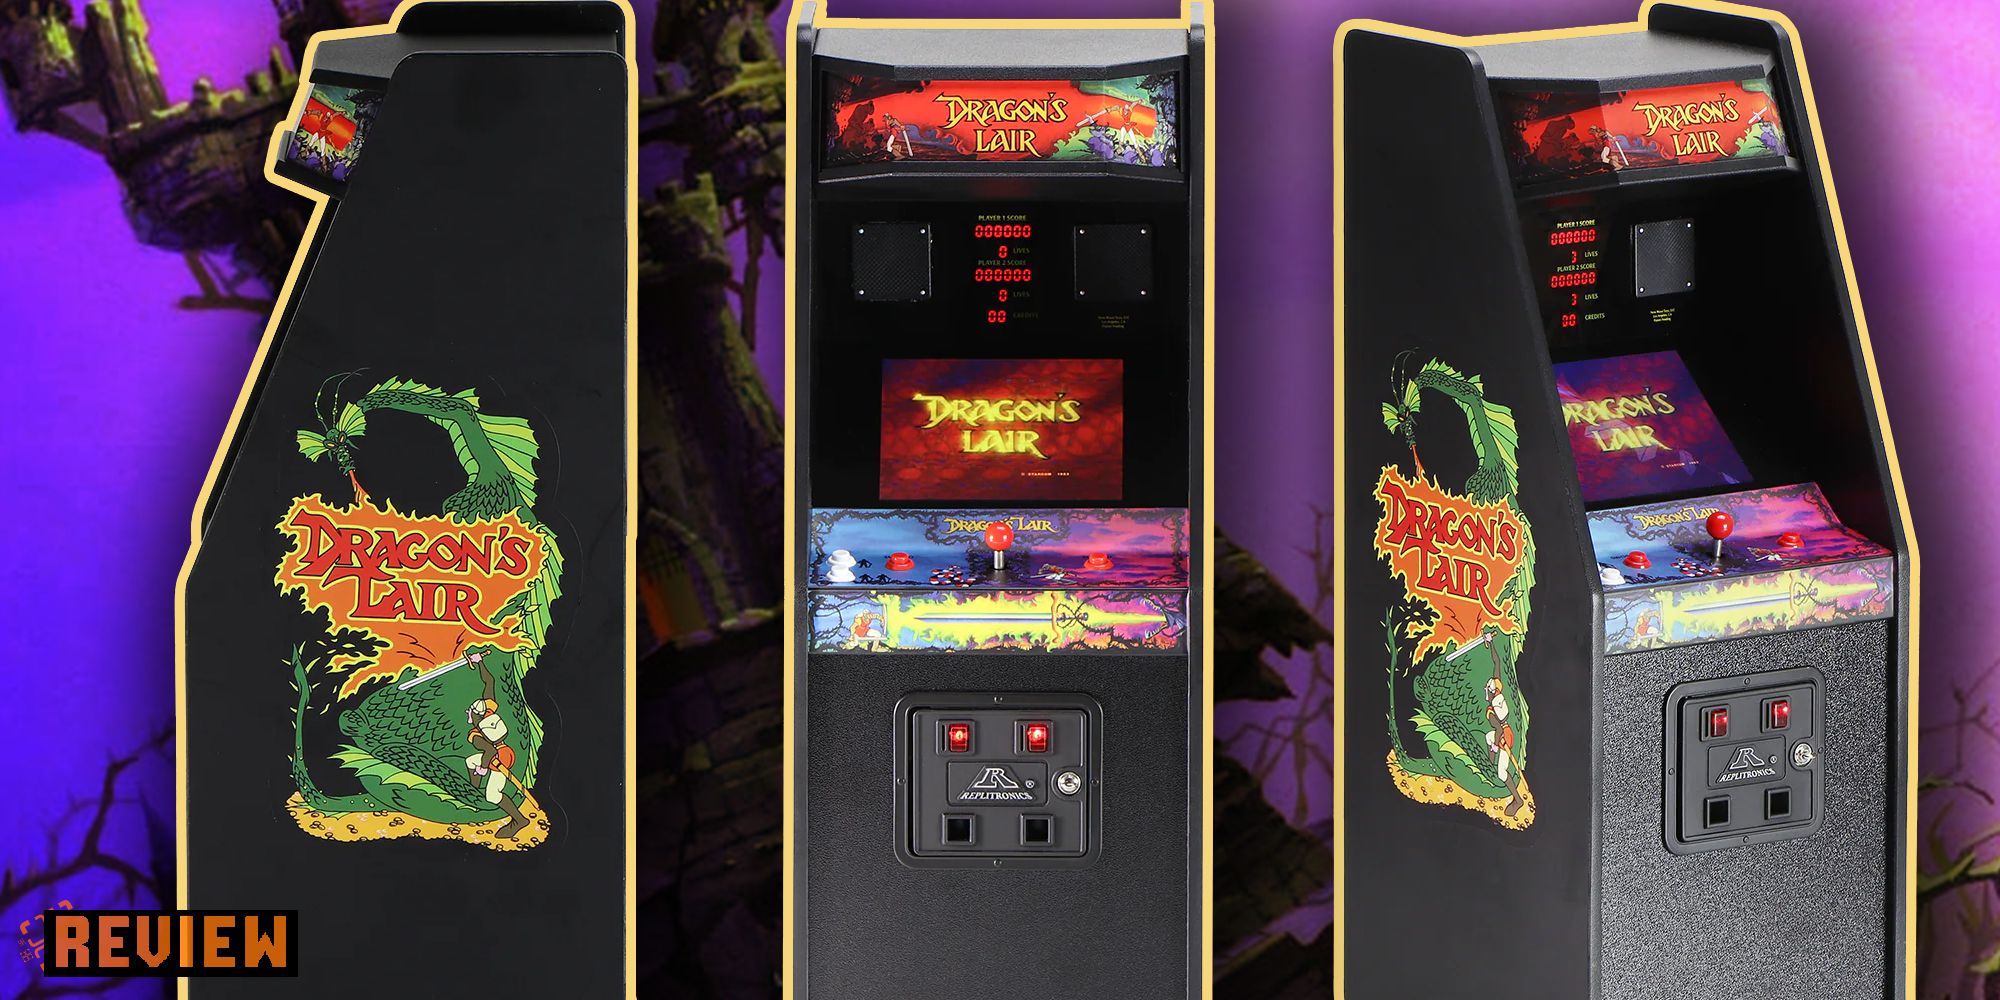 Product images from Dragon's Lair X Replicade Arcade.